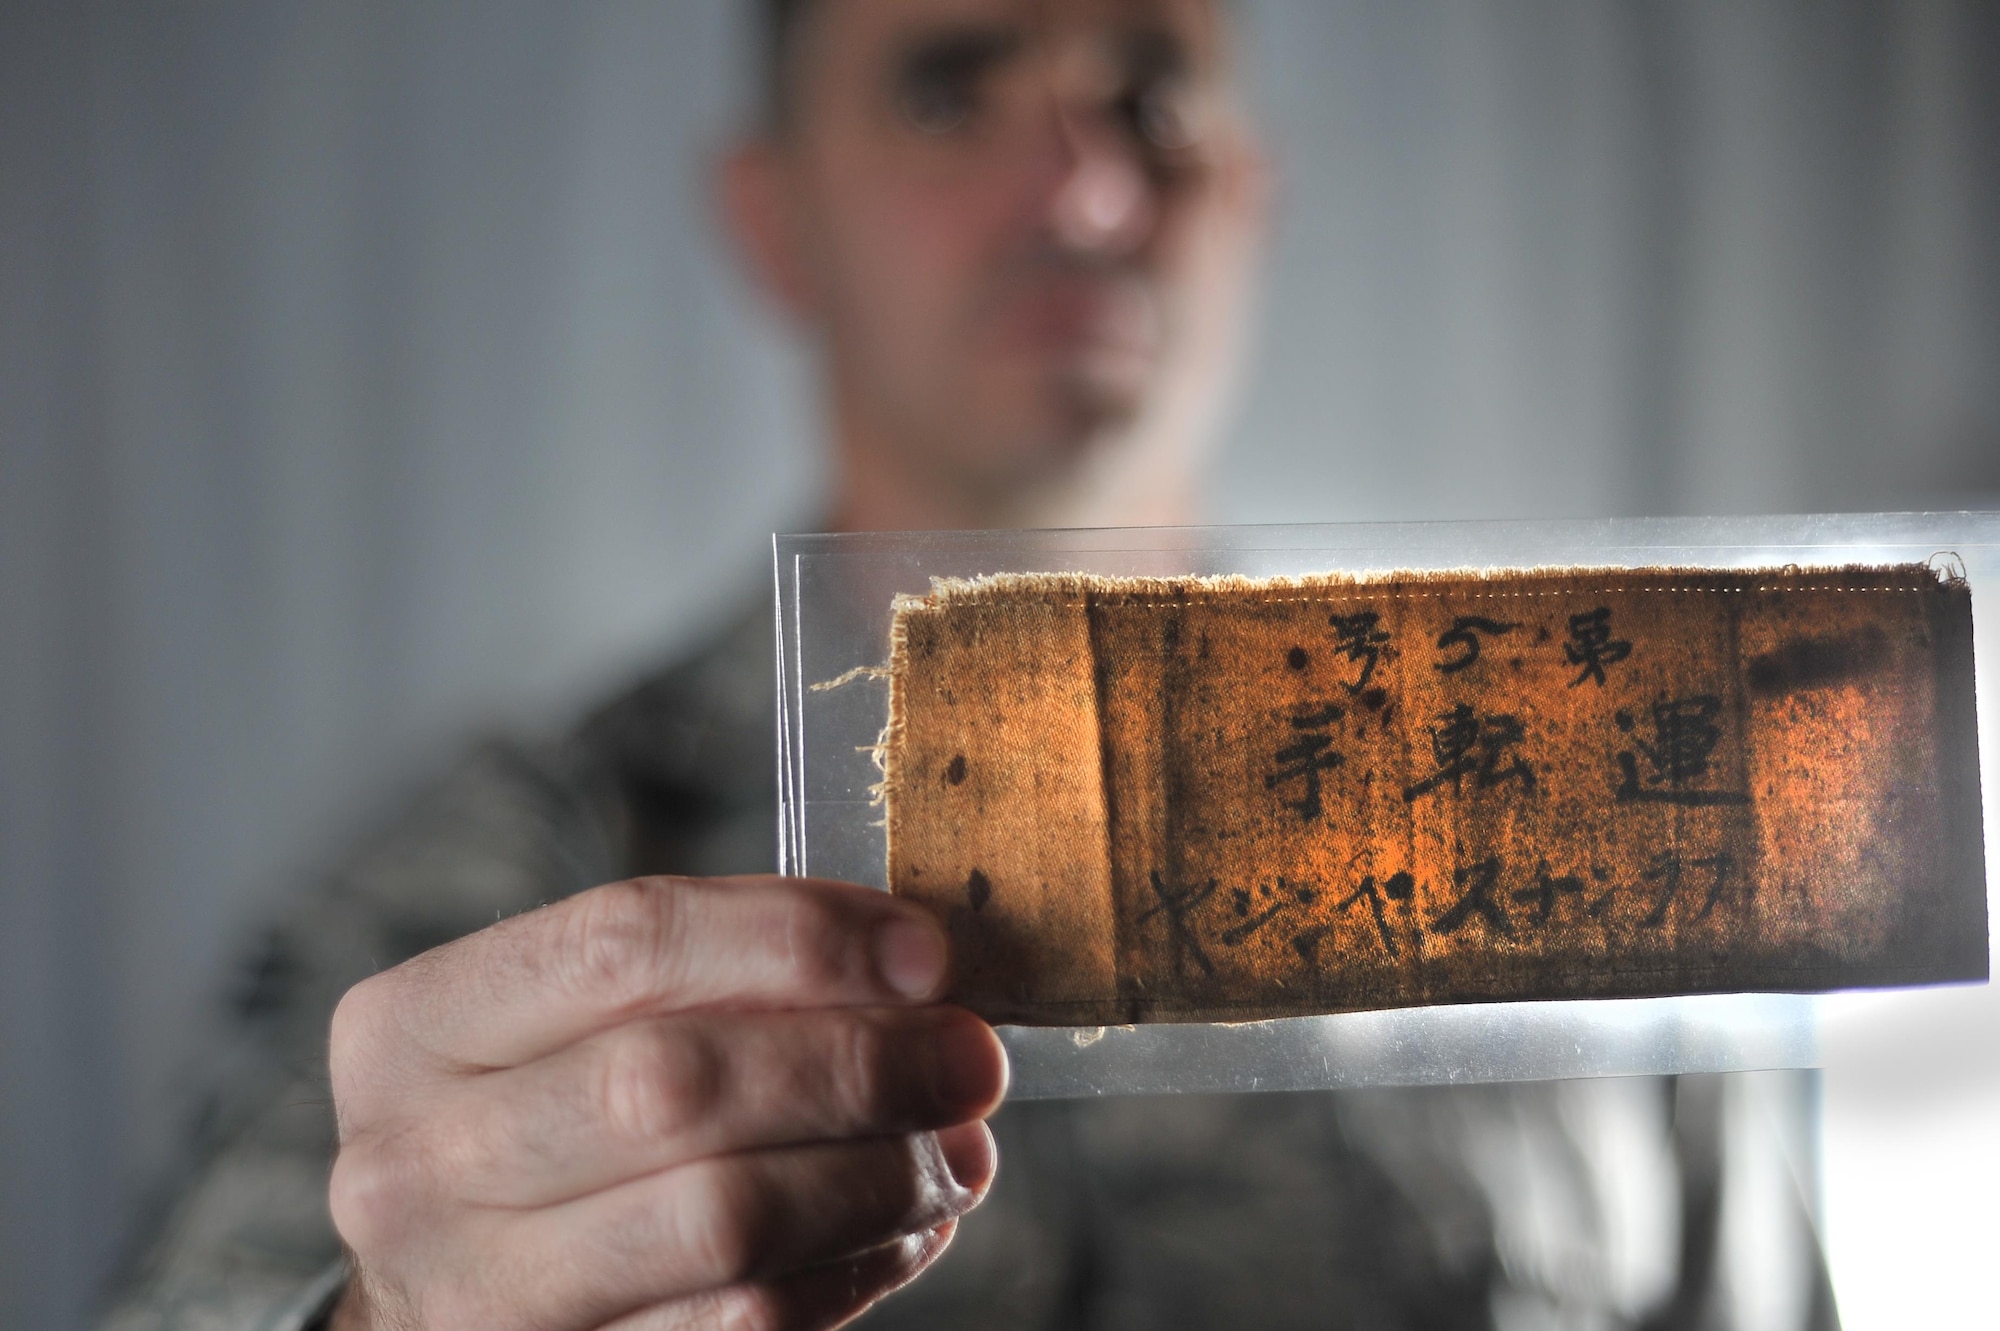 Chief Master Sgt. Jake Higginbotham, 70th Intelligence, Surveillance and Reconnaissance Wing command chief, holds the arm band that Master Sgt. retired Francis M. Bania wore while imprisoned after the Bataan Death March.  (U.S. Air Force photo/Staff Sgt. Alexandre Montes)